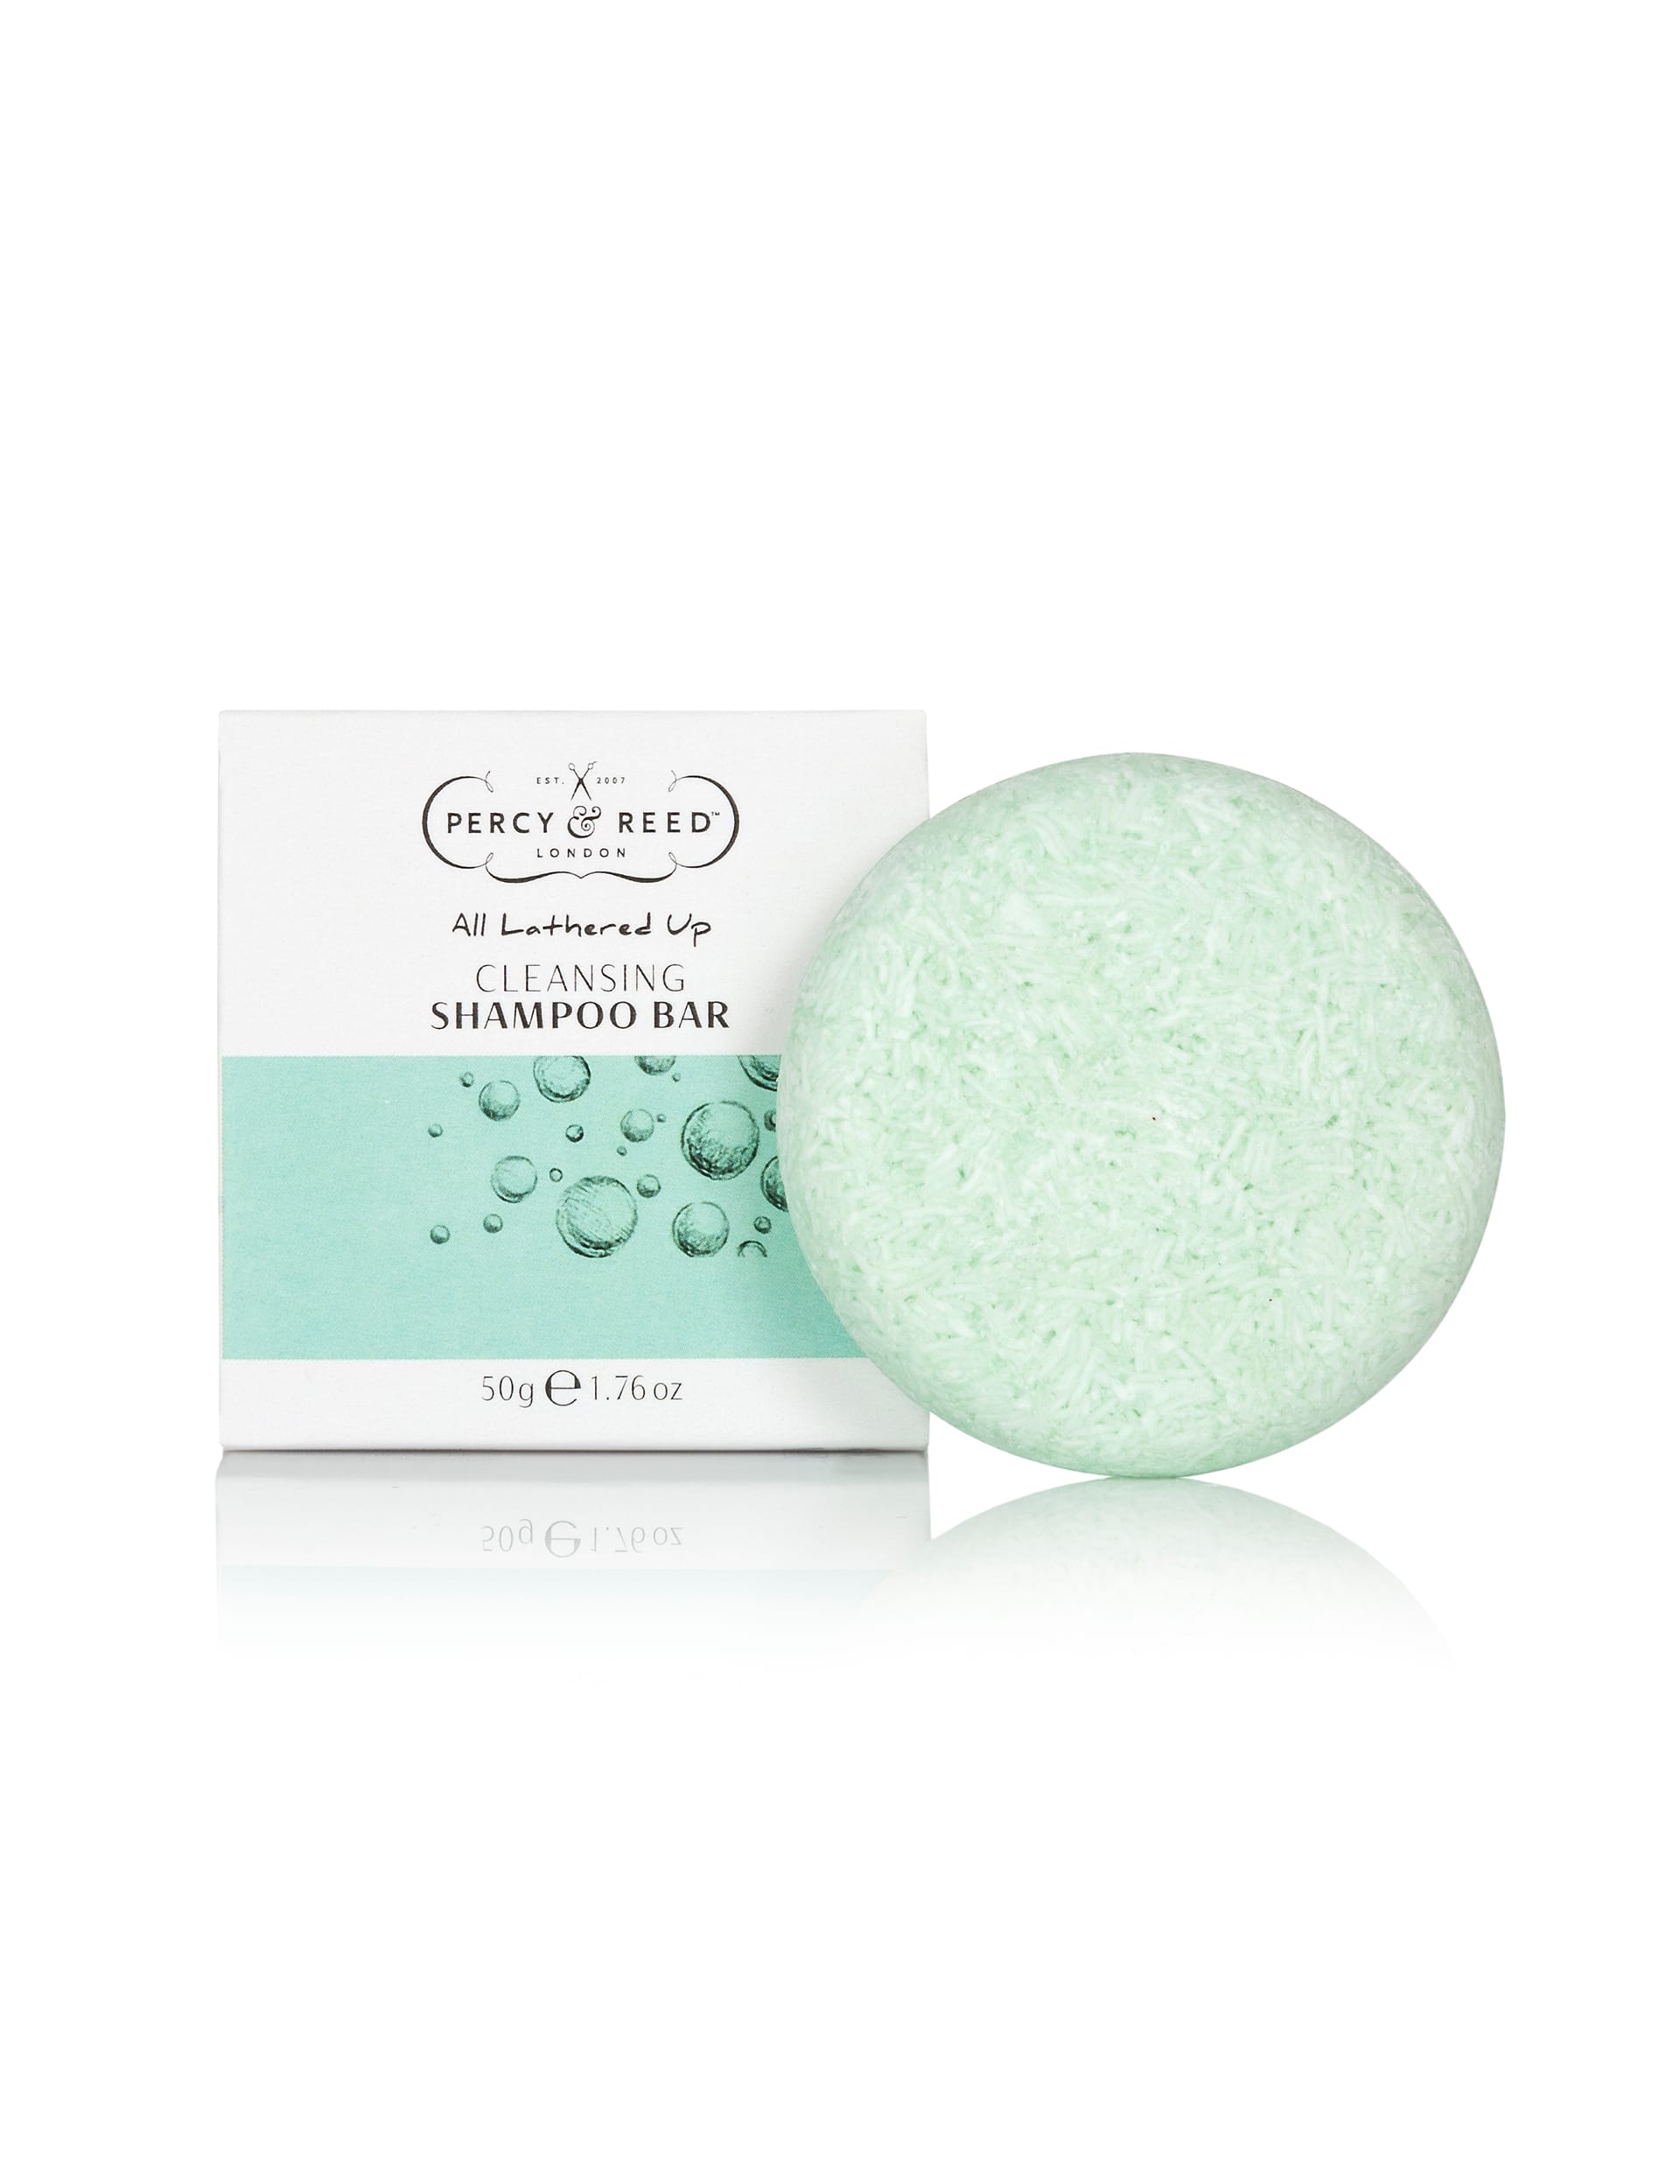 All Lathered Up Cleansing Shampoo Bar 50g